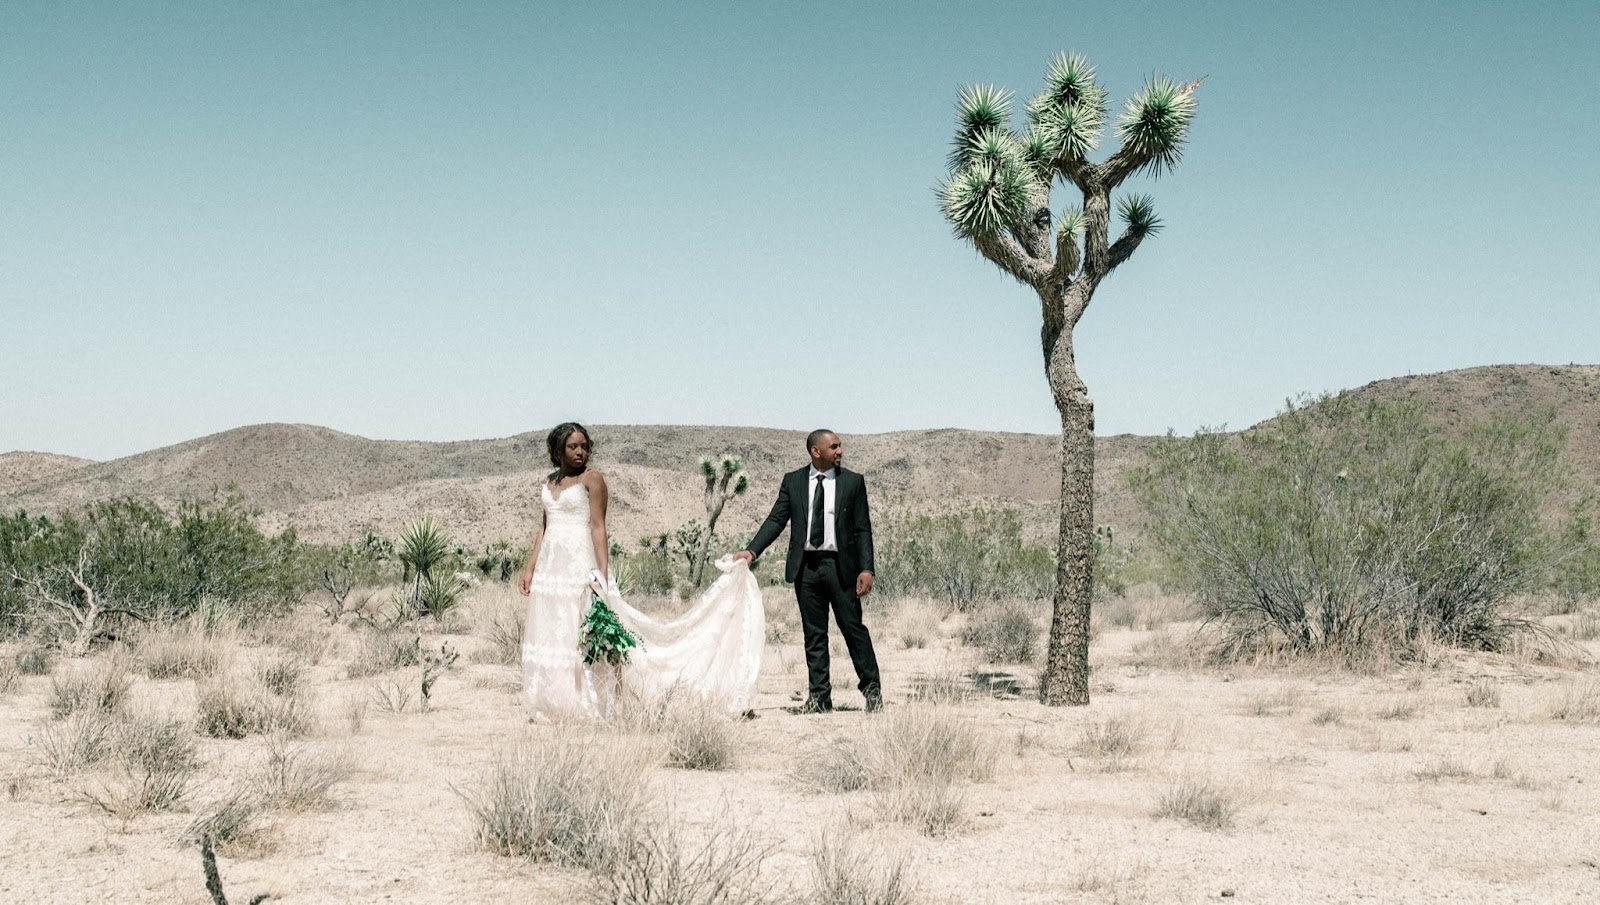 wedding at the mexican desert